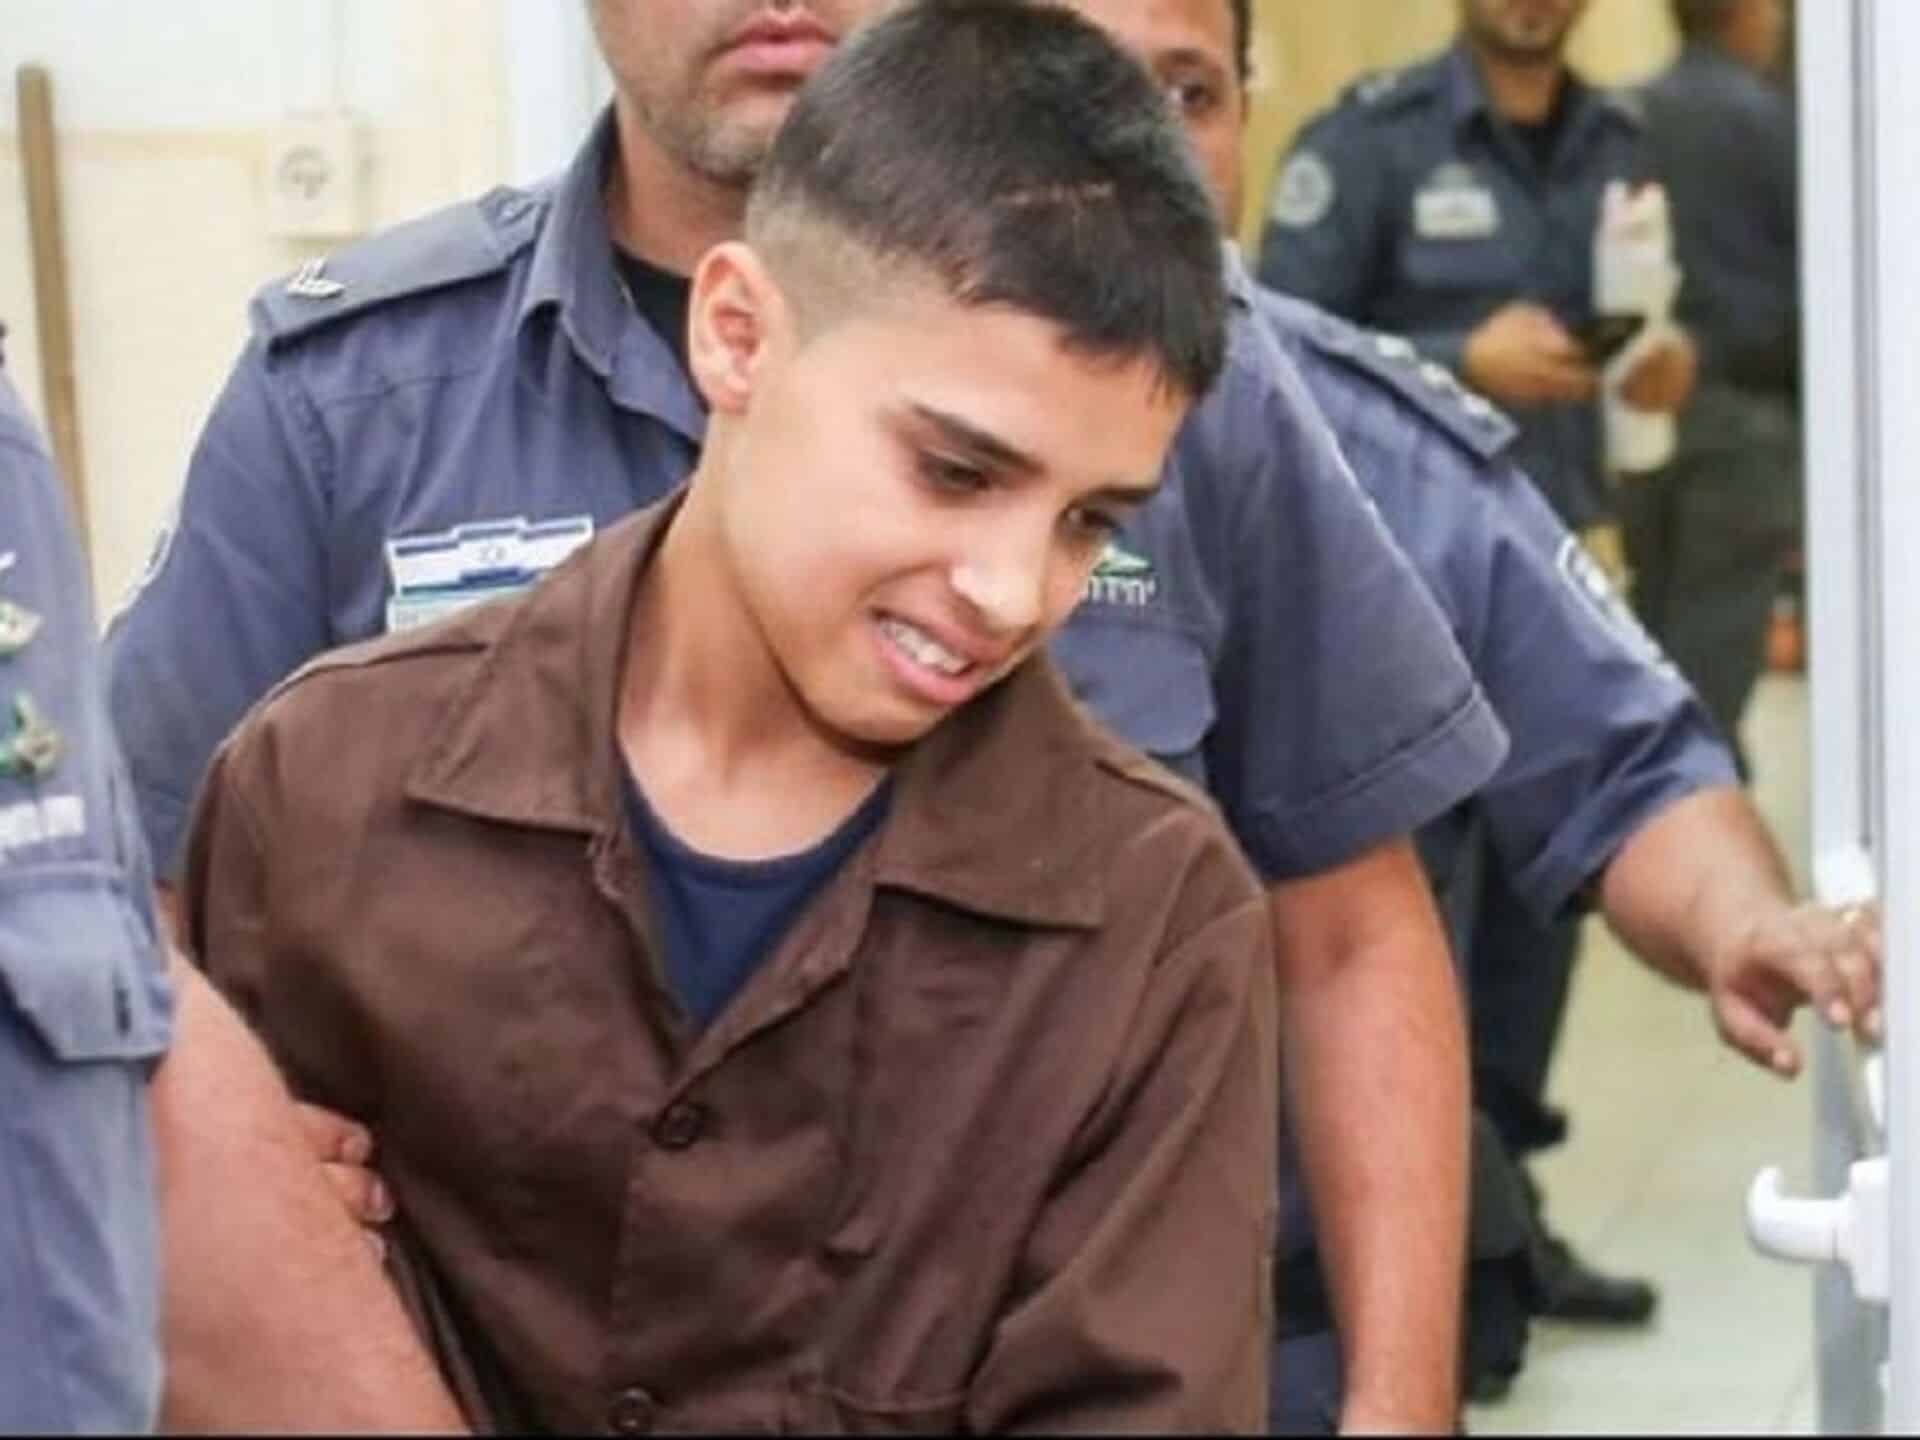 Ahmed Manasra was tried and indicted in Israeli military court when he was 13 years old. Photo: via IMEMC.